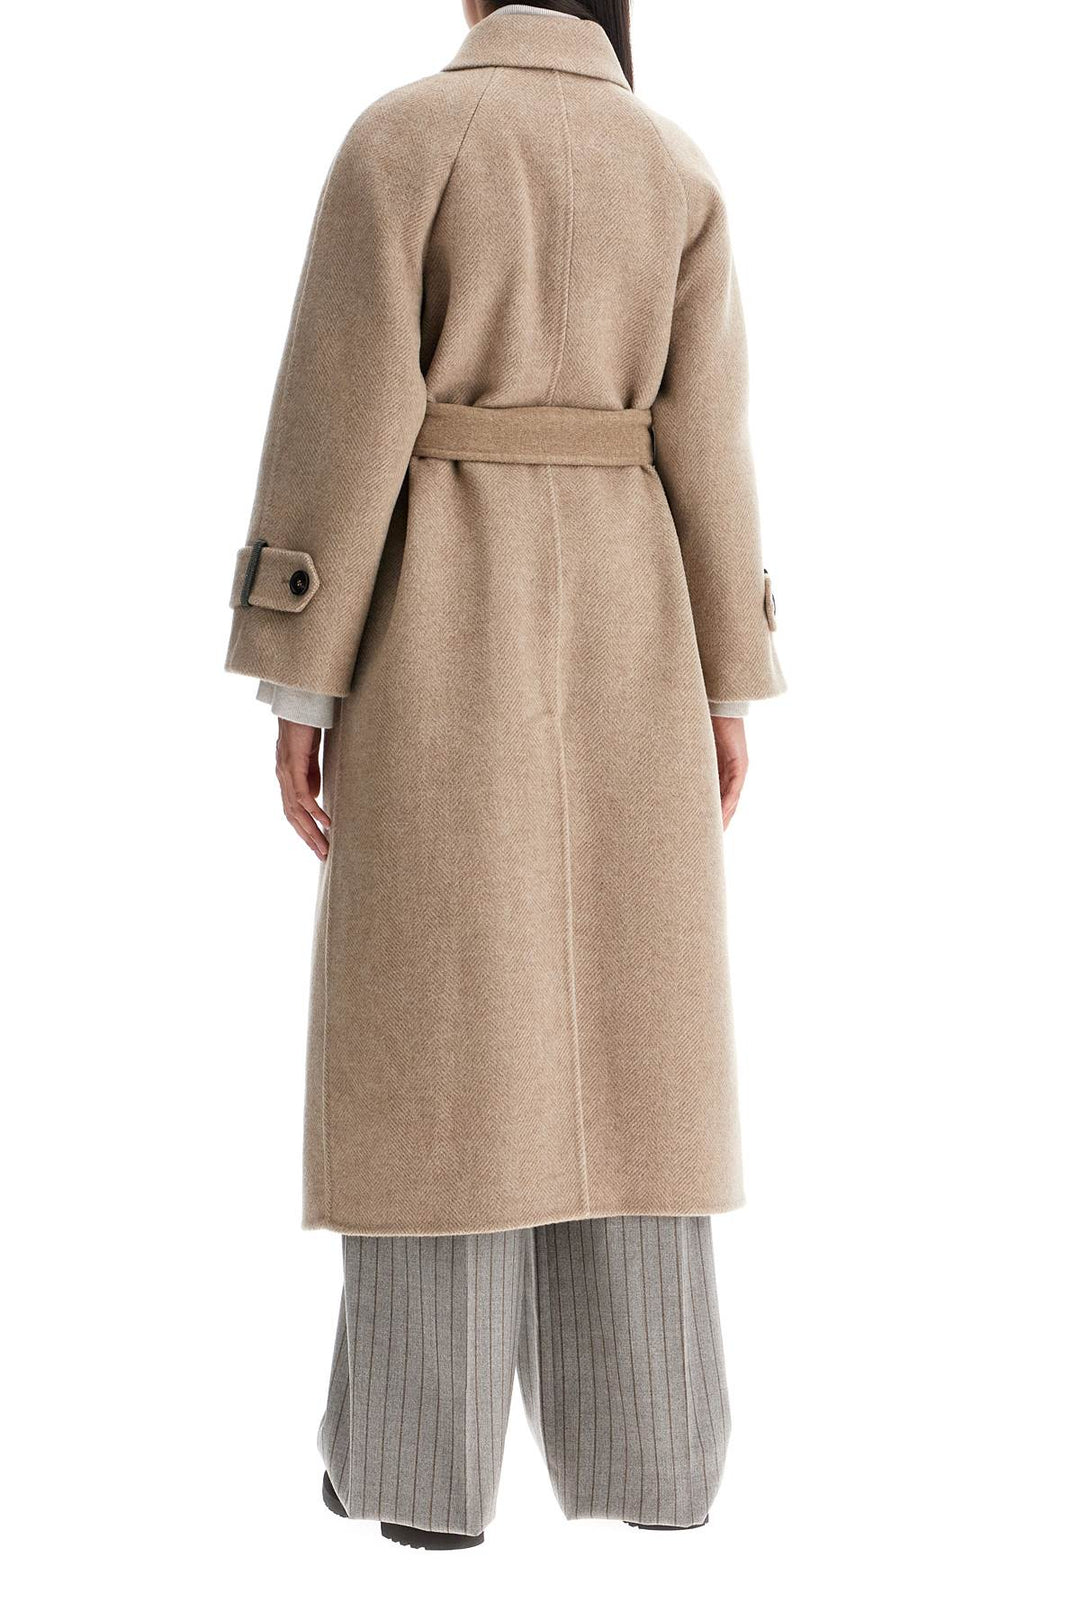 Brunello Cucinelli Wool And Cashmere Coat With Belt.   Beige